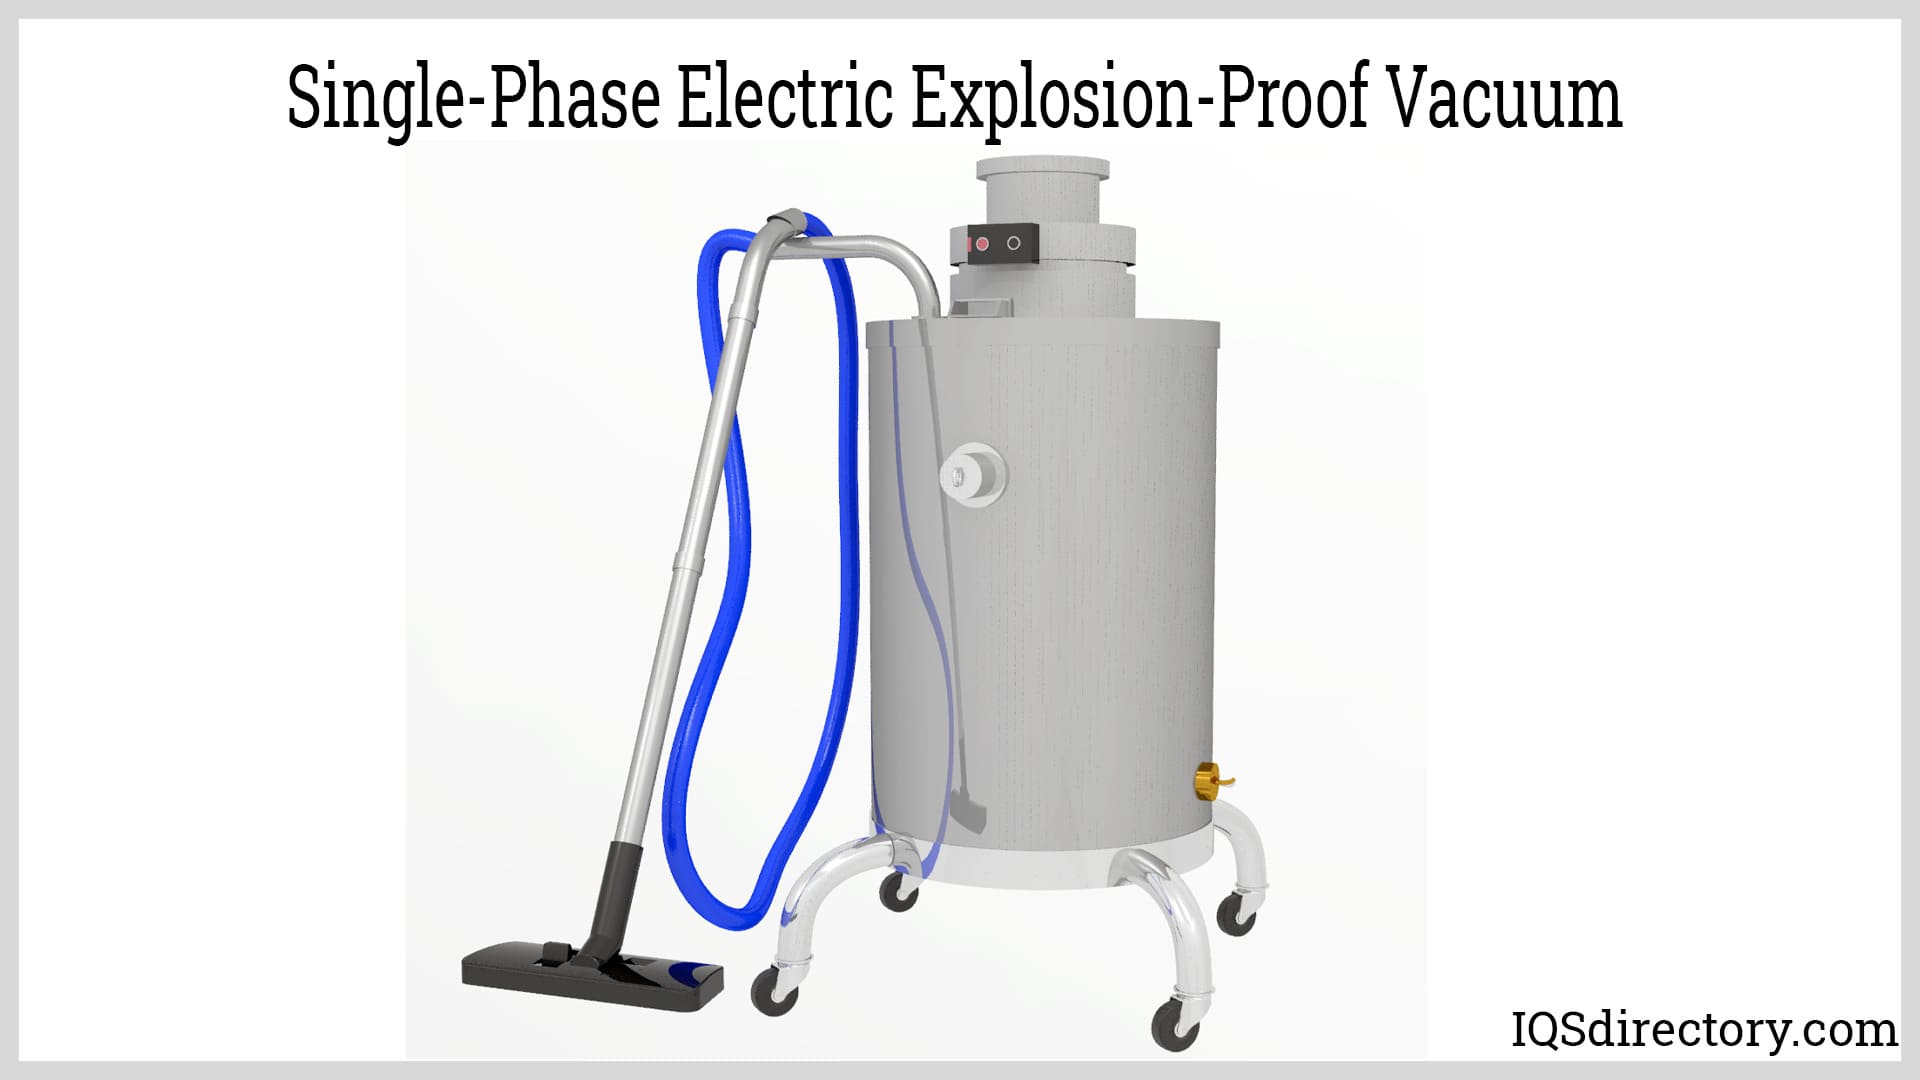 Single-Phase Electric Explosion-Proof Vacuum